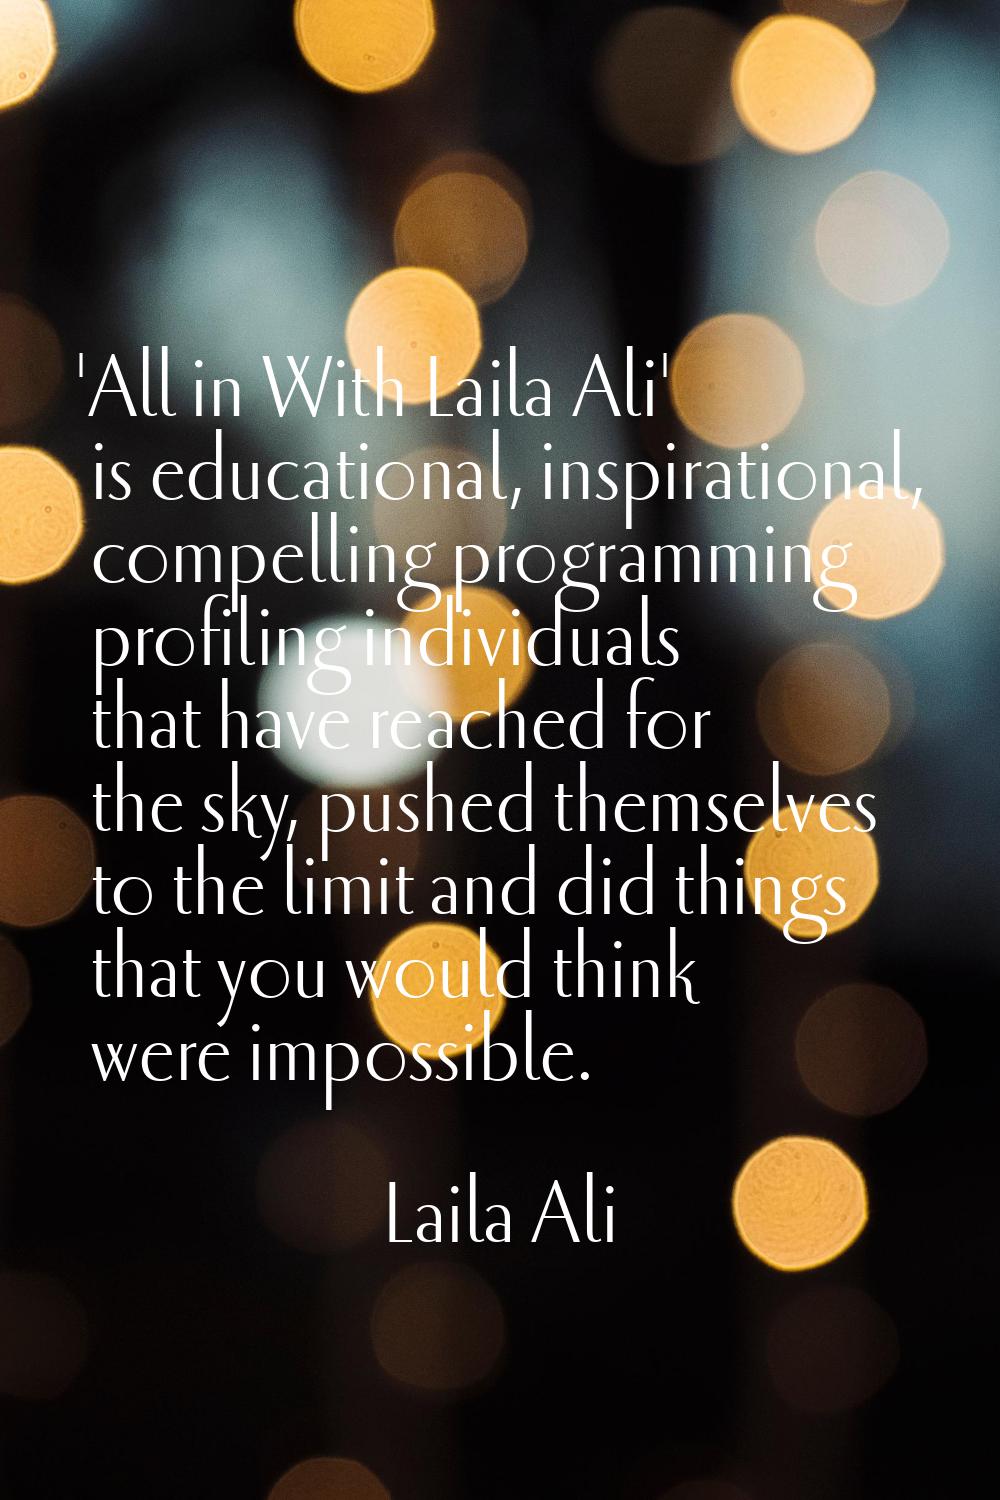 'All in With Laila Ali' is educational, inspirational, compelling programming profiling individuals